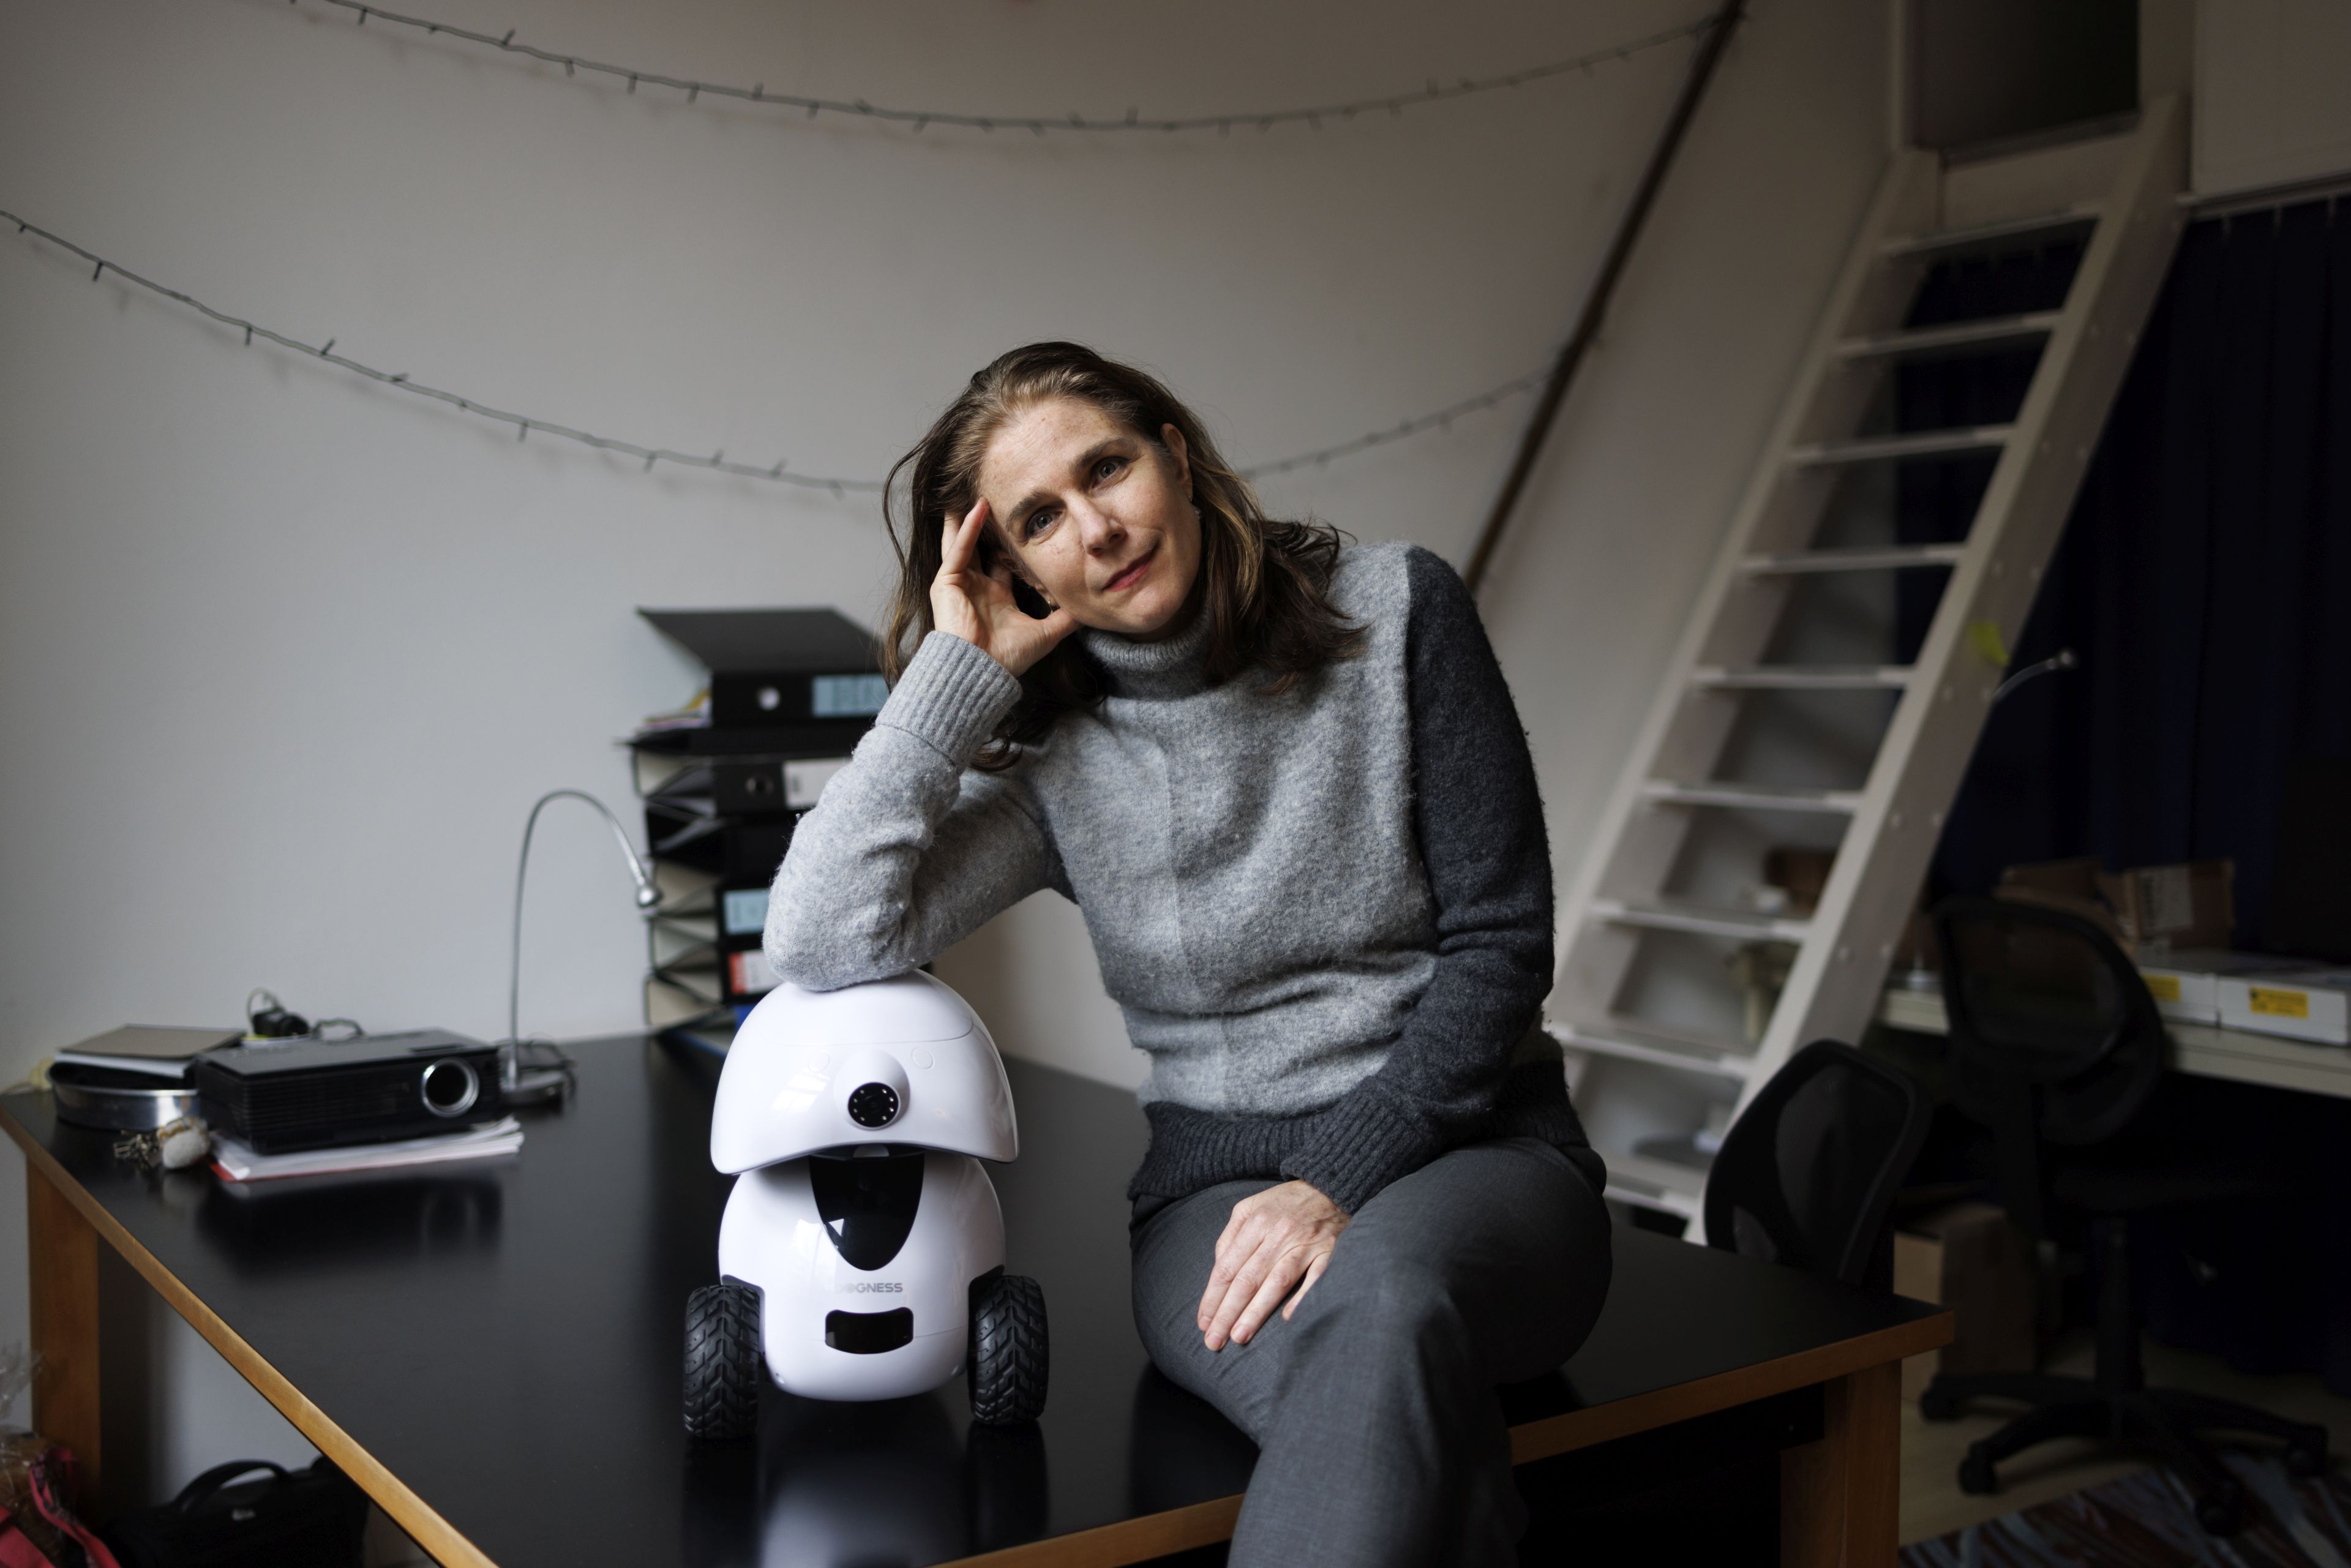 Gomperts, leaning on the pill robot that was used in actions: ‘I think the very existence of an Abortion Act and abortion clinics is wrong. Abortion is a medical procedure that has no place in criminal law.'